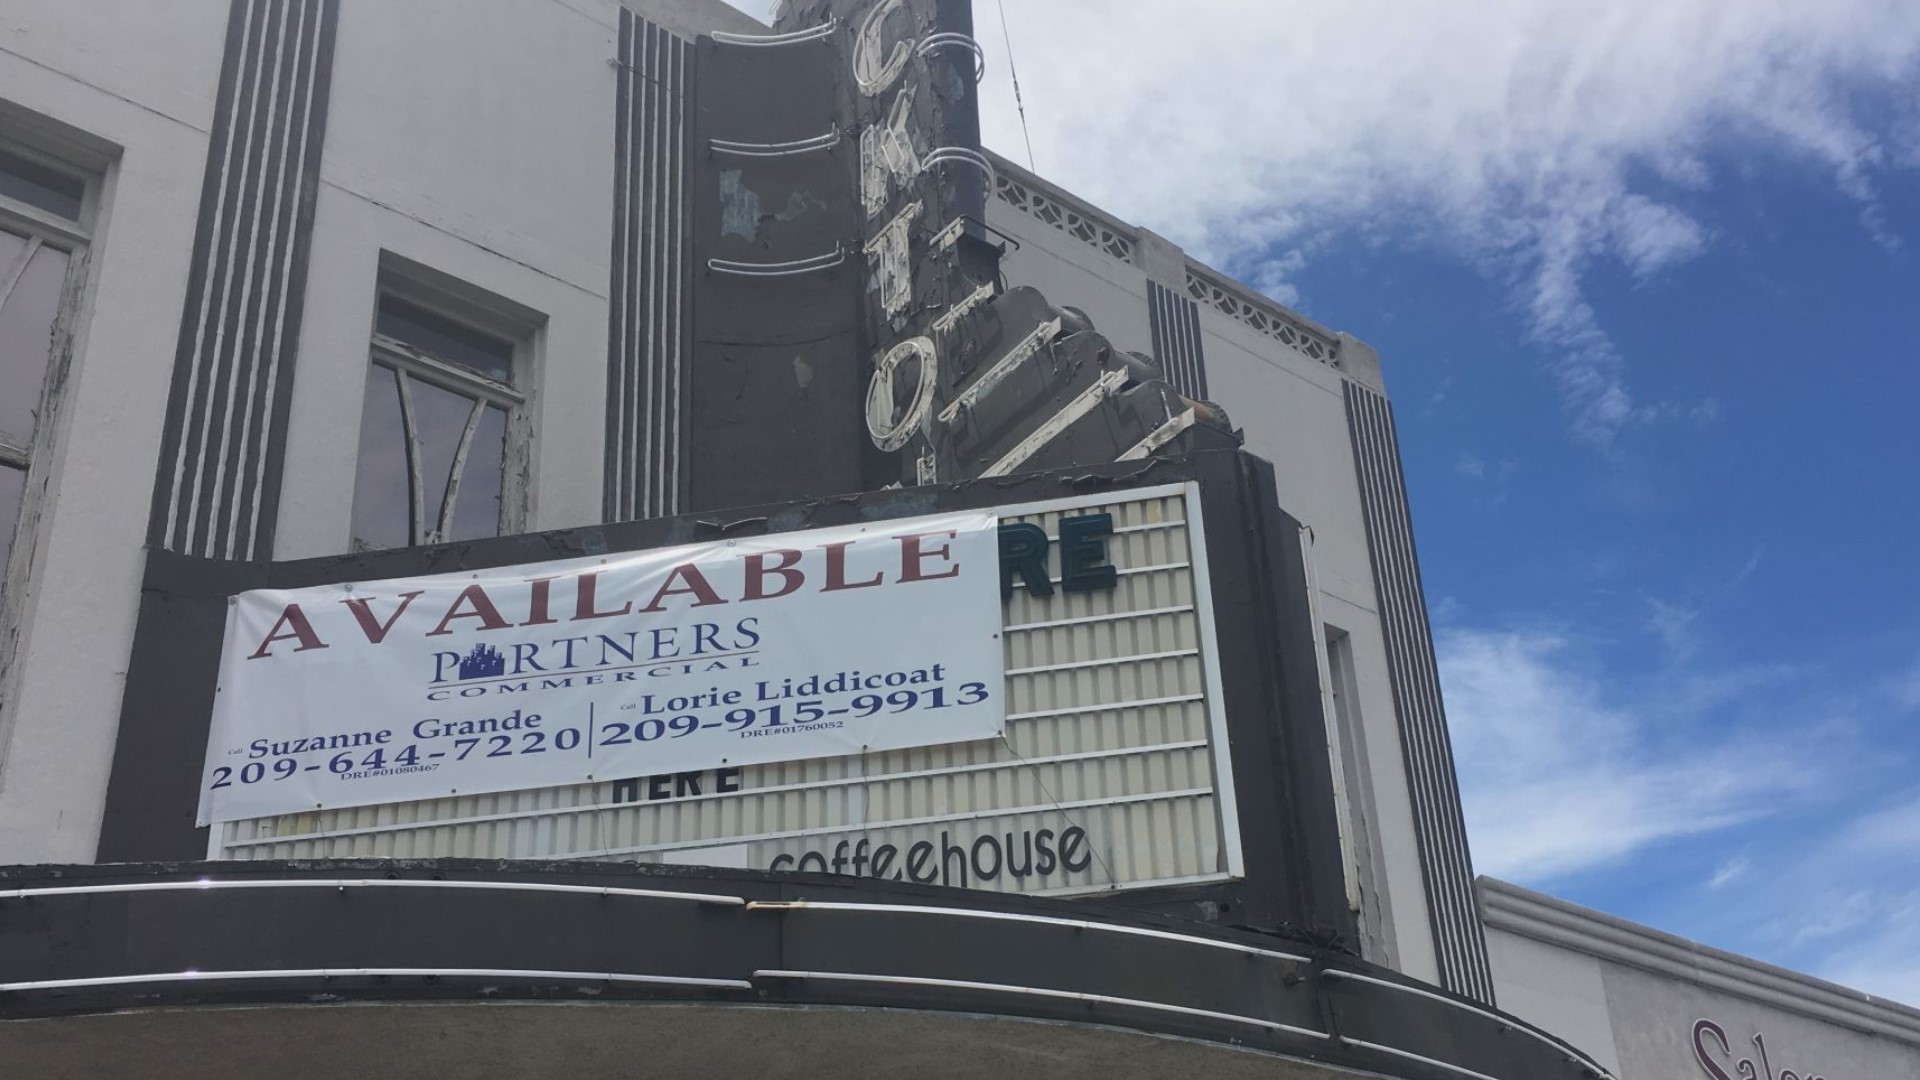 Two years ago, nine businesses on Stockton’s “Miracle Mile” were forced to move out when the city cited the building's owner for code violations. Soon, those buildings will have new businesses.